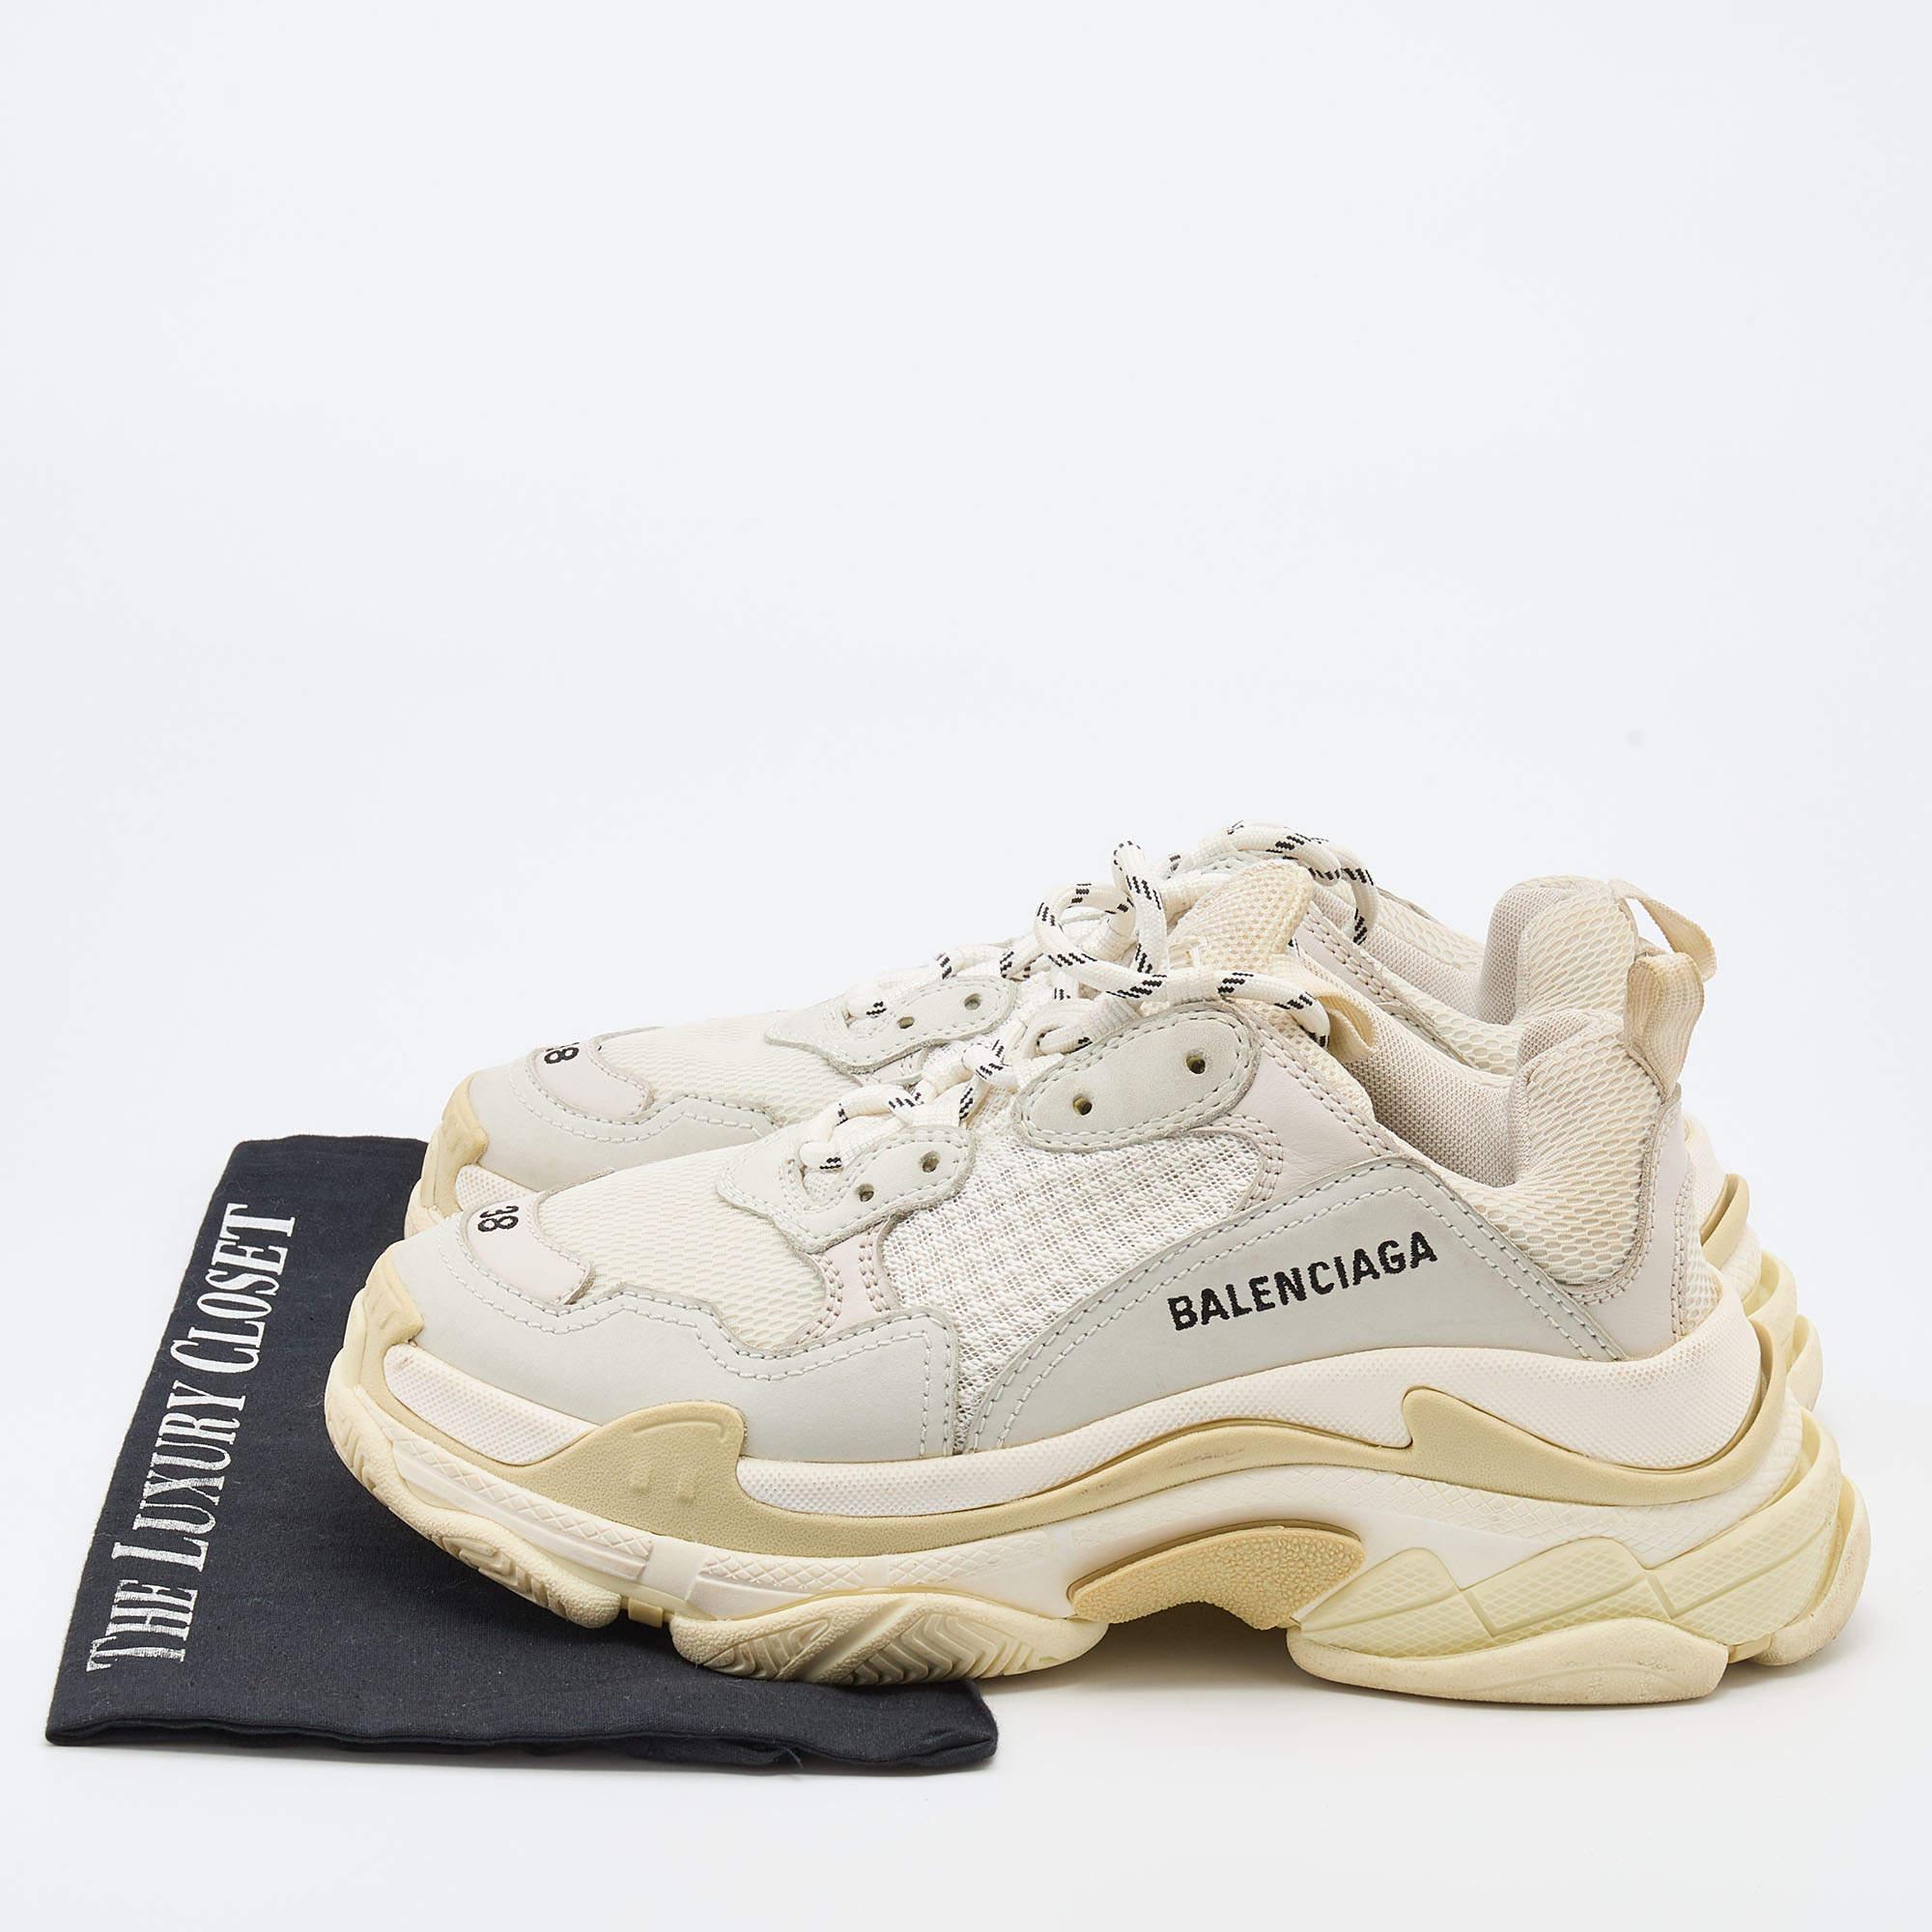 Balenciaga White/Grey Leather and Mesh Triple S Sneakers Size 38 3